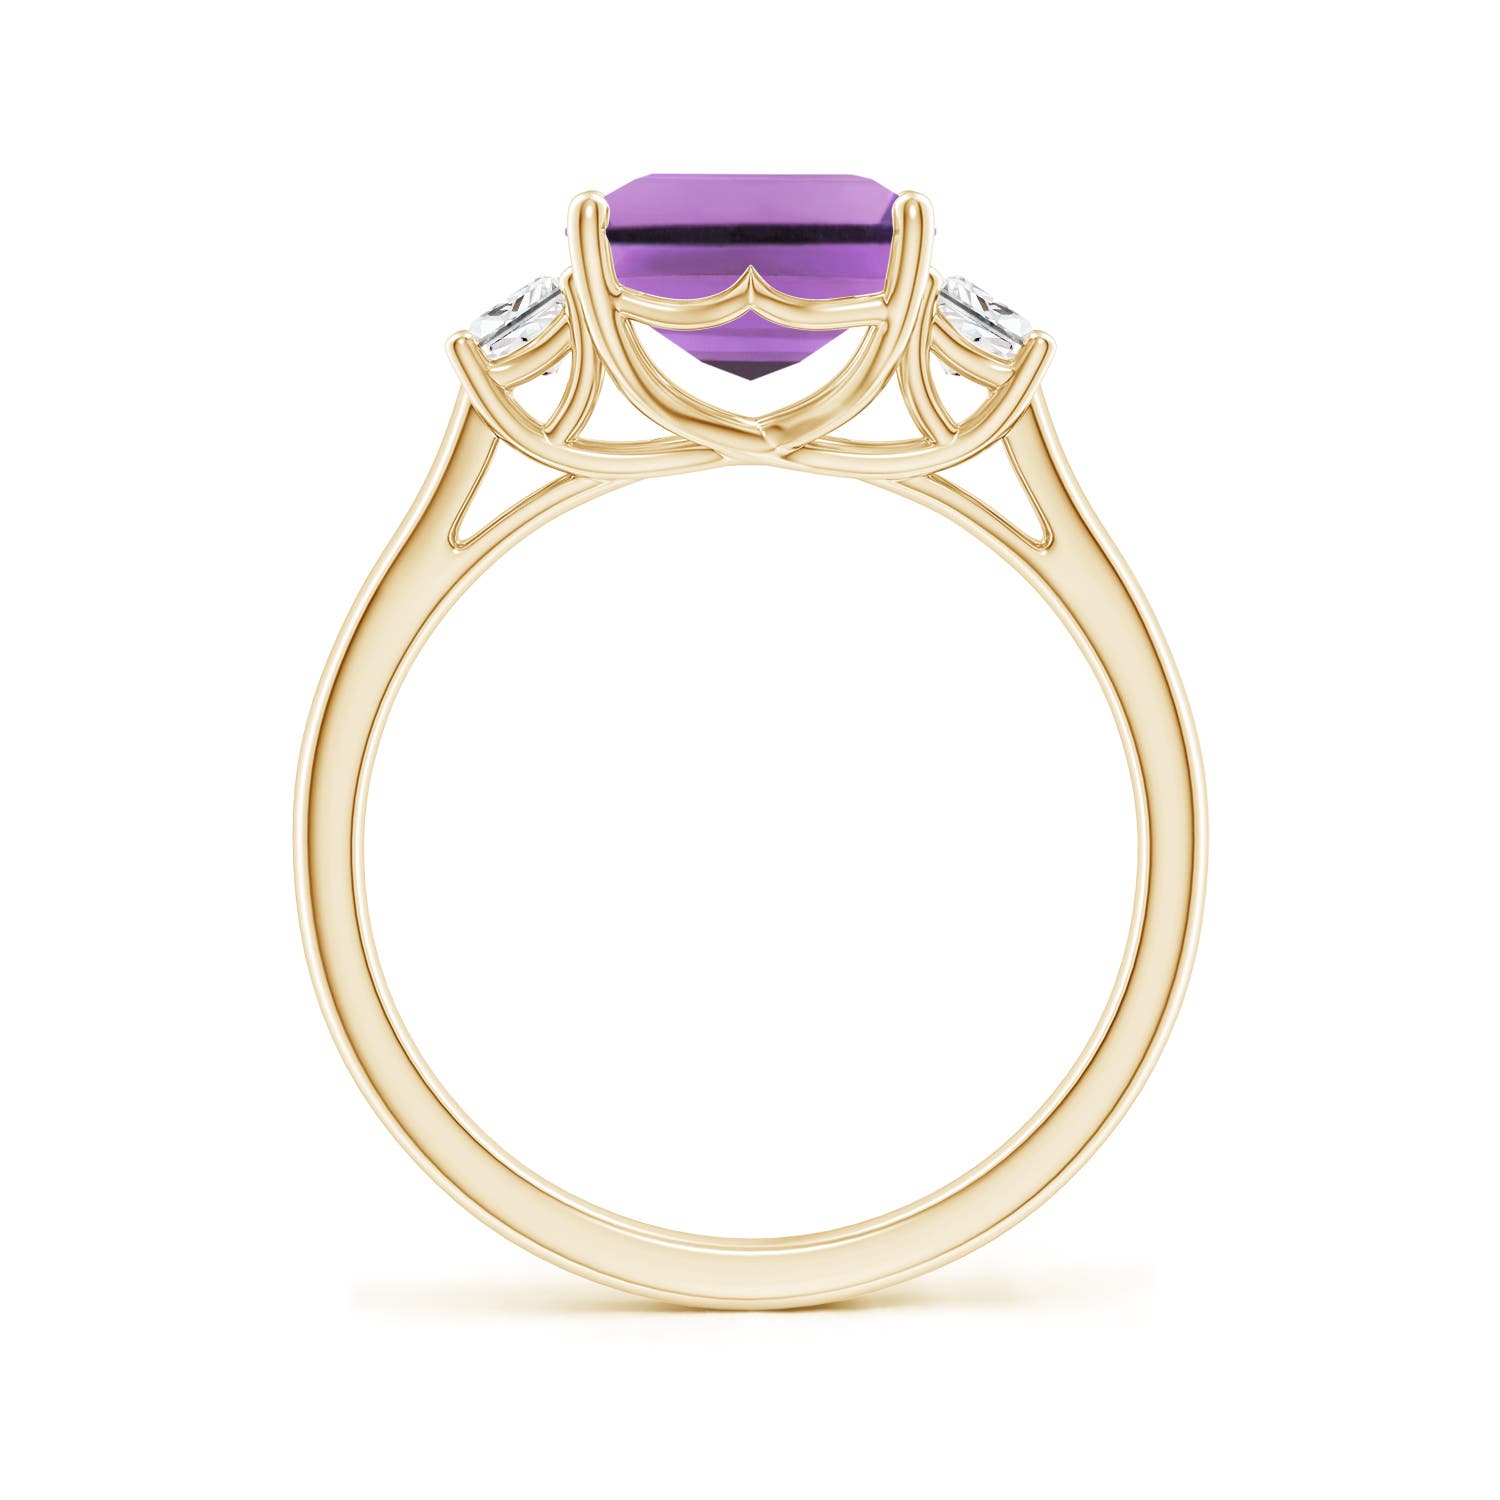 A- Amethyst / 3.22 CT / 14 KT Yellow Gold